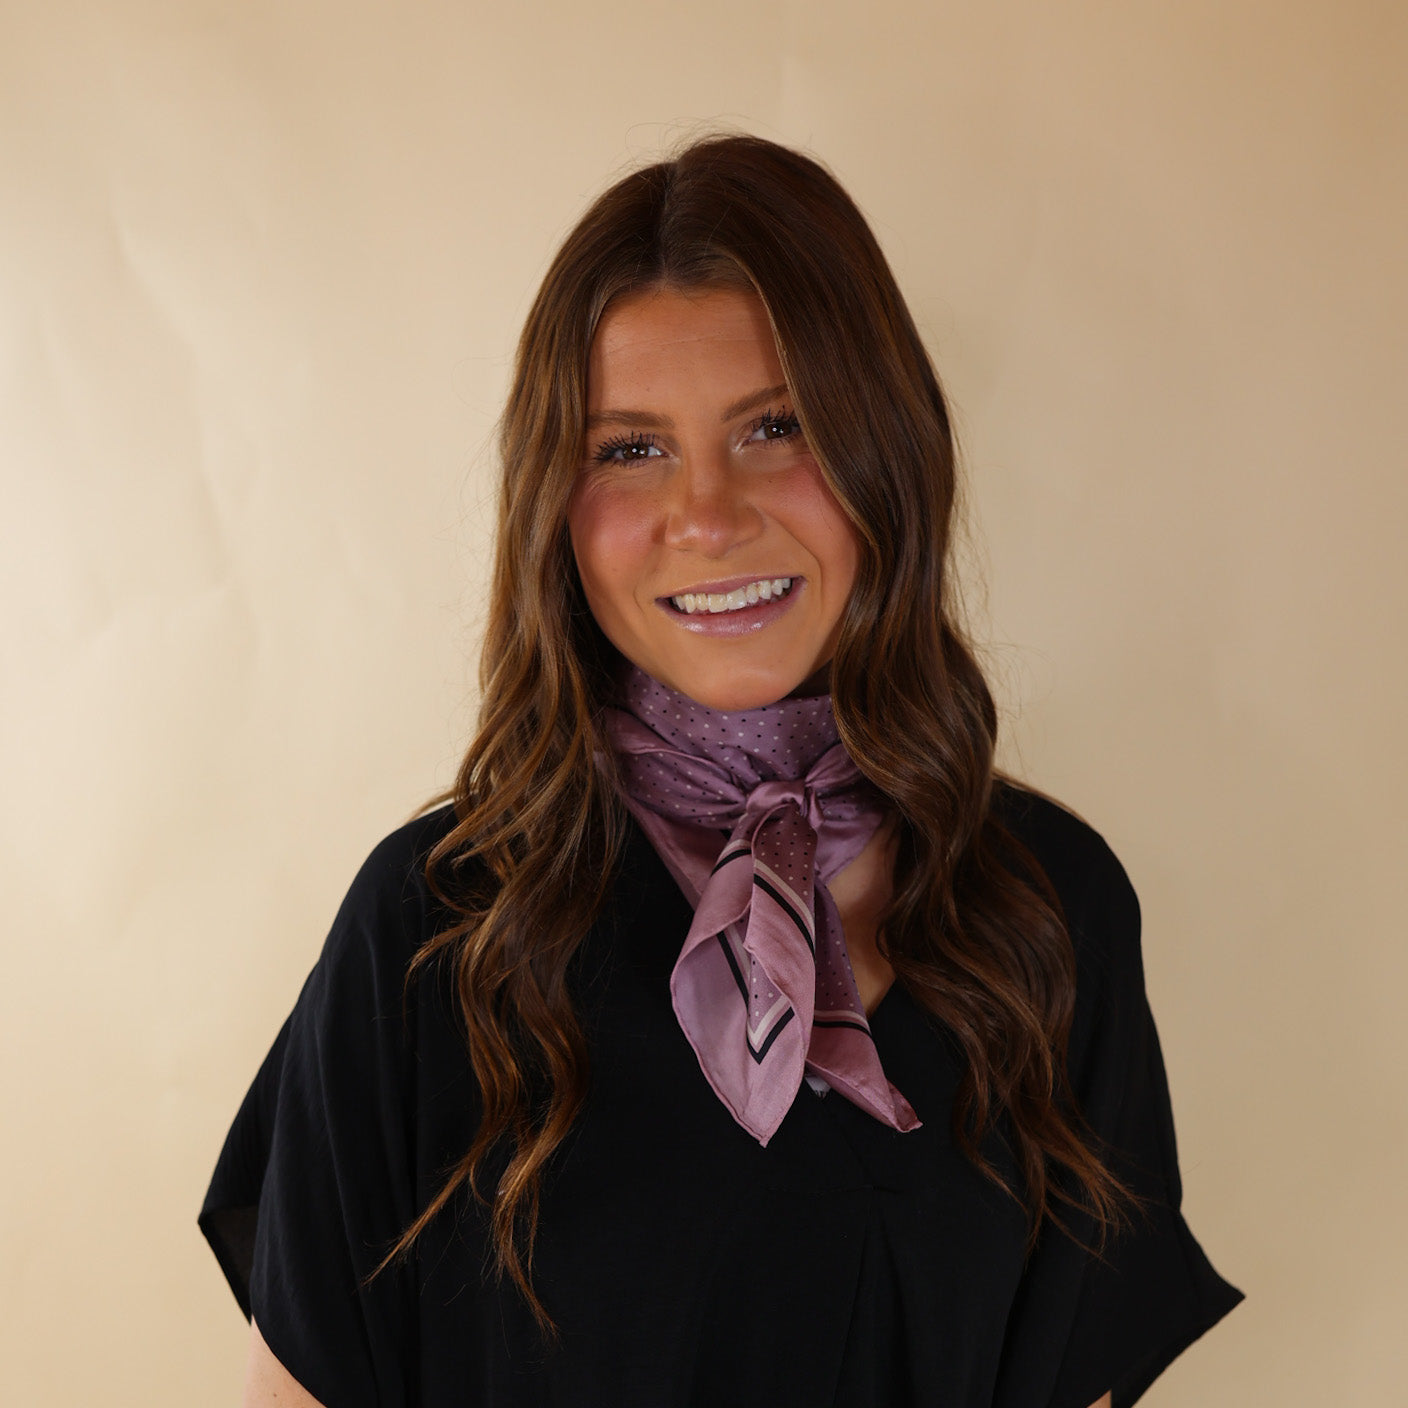 Brunette model is pictured wearing a Black, Drop shoulder top with a pink and Black Polka Dot scarf tied around her neck. Model is pictured in front of a beige background. 